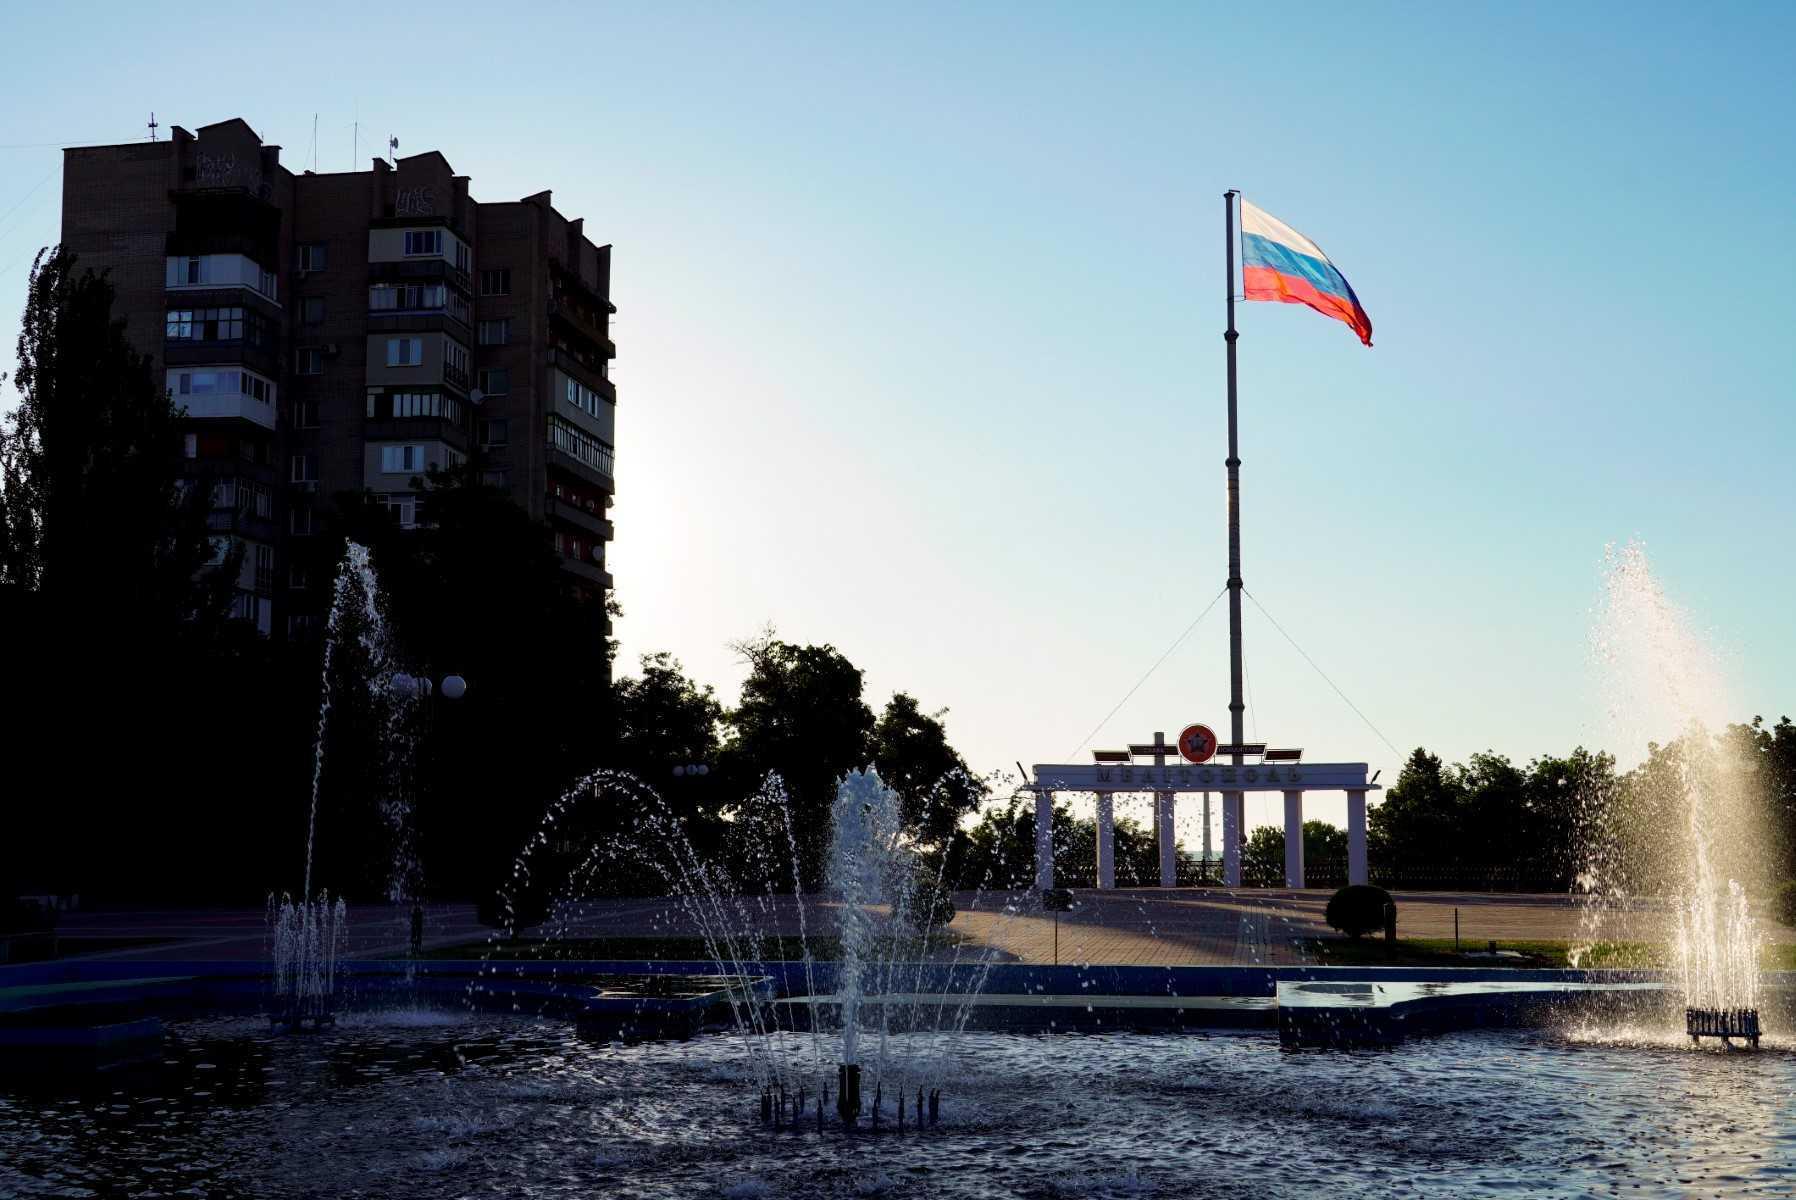 A photo taken on July 18 shows a Russian flag flying in the wind in Melitopol, Zaporizhzhia region, amid the ongoing Russian military action in Ukraine. Photo: AFP